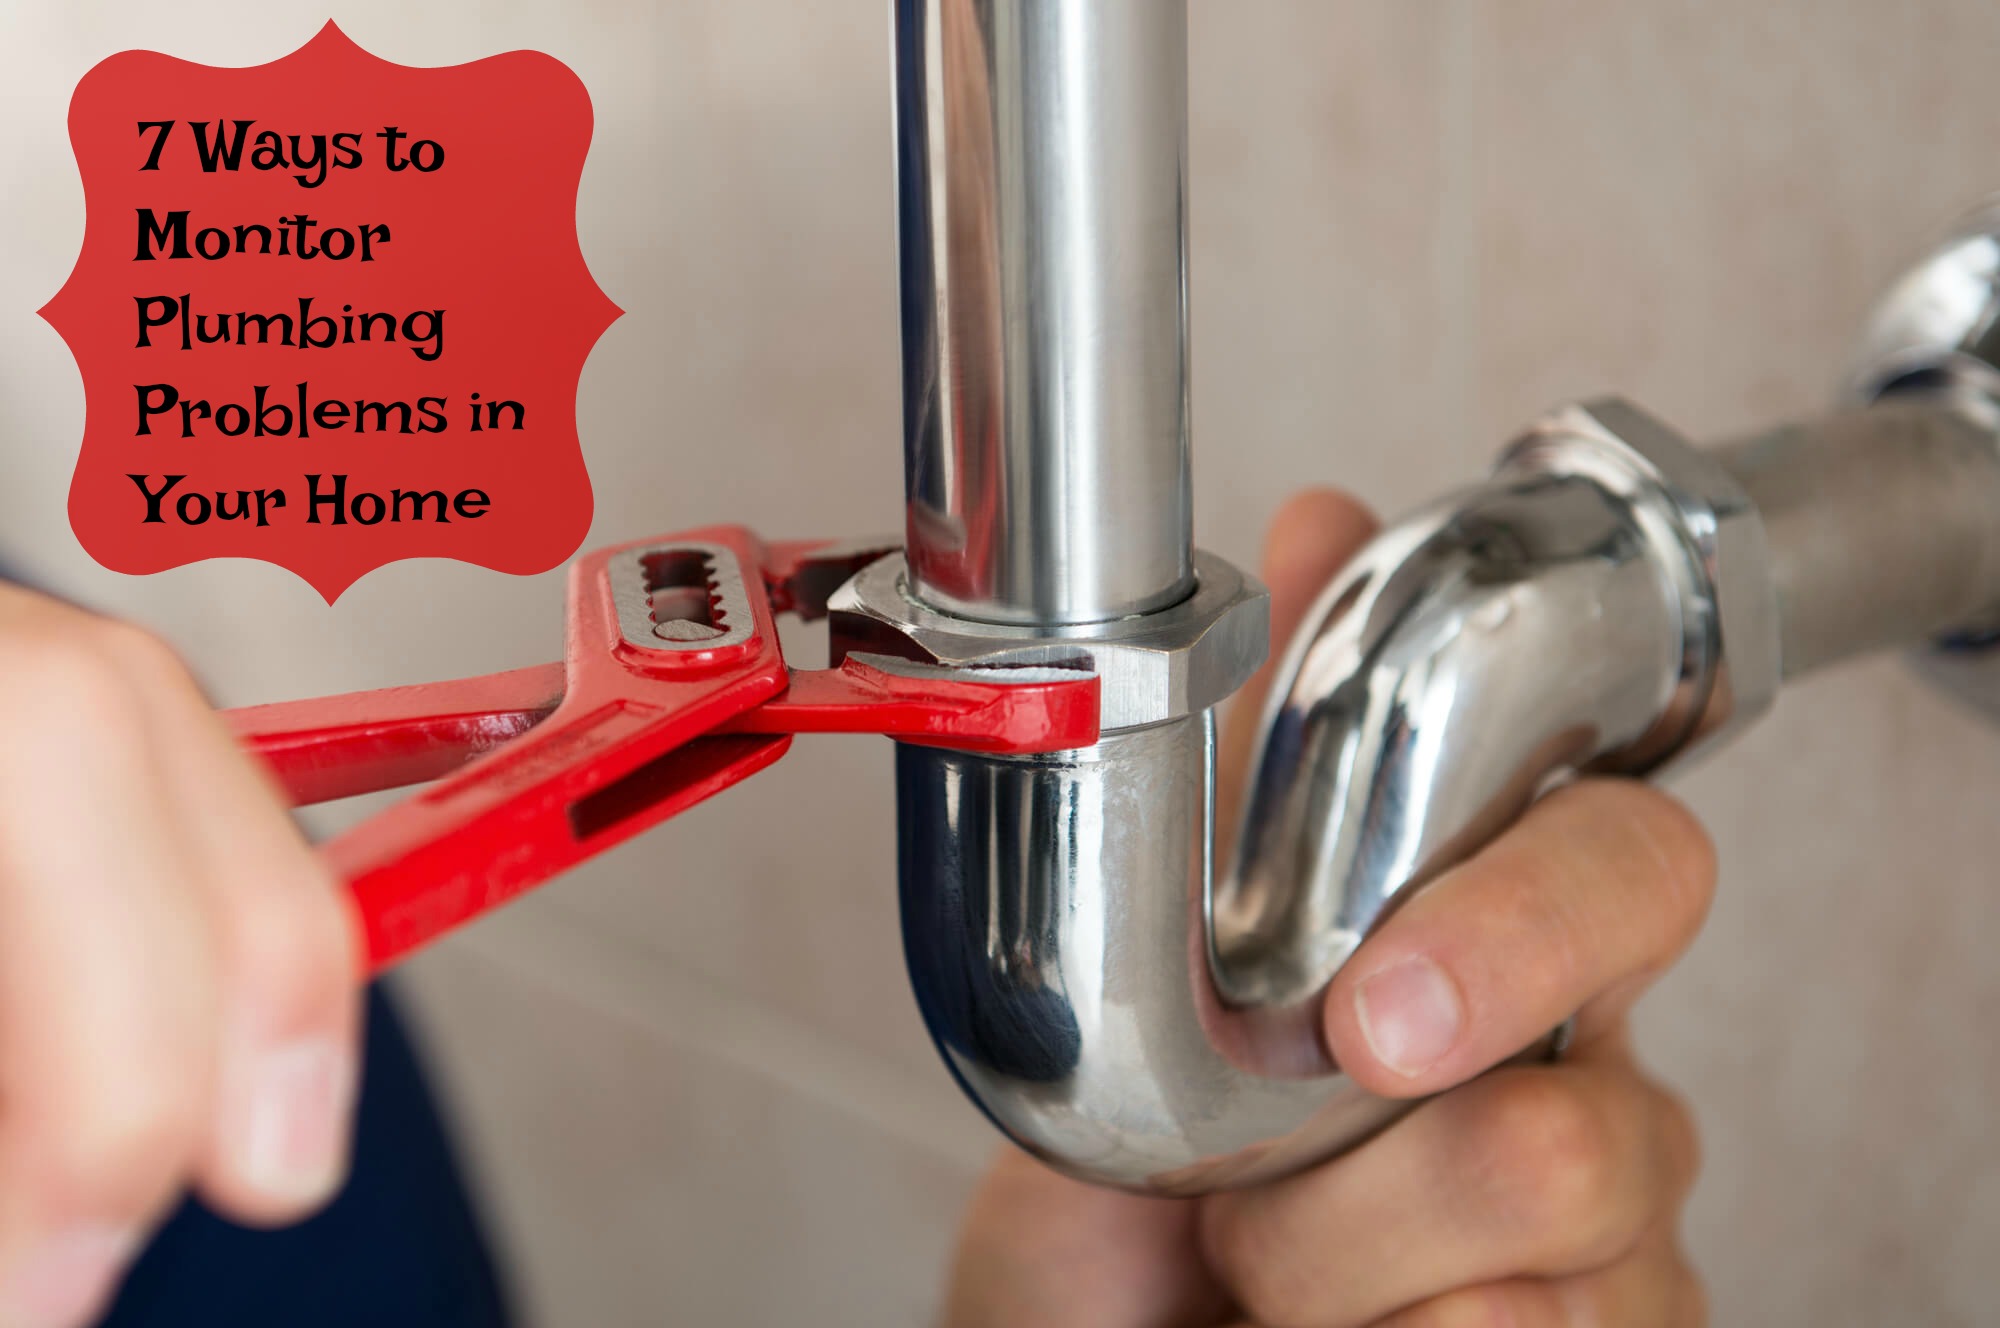 7 Ways to Monitor Plumbing Problems in Your Home